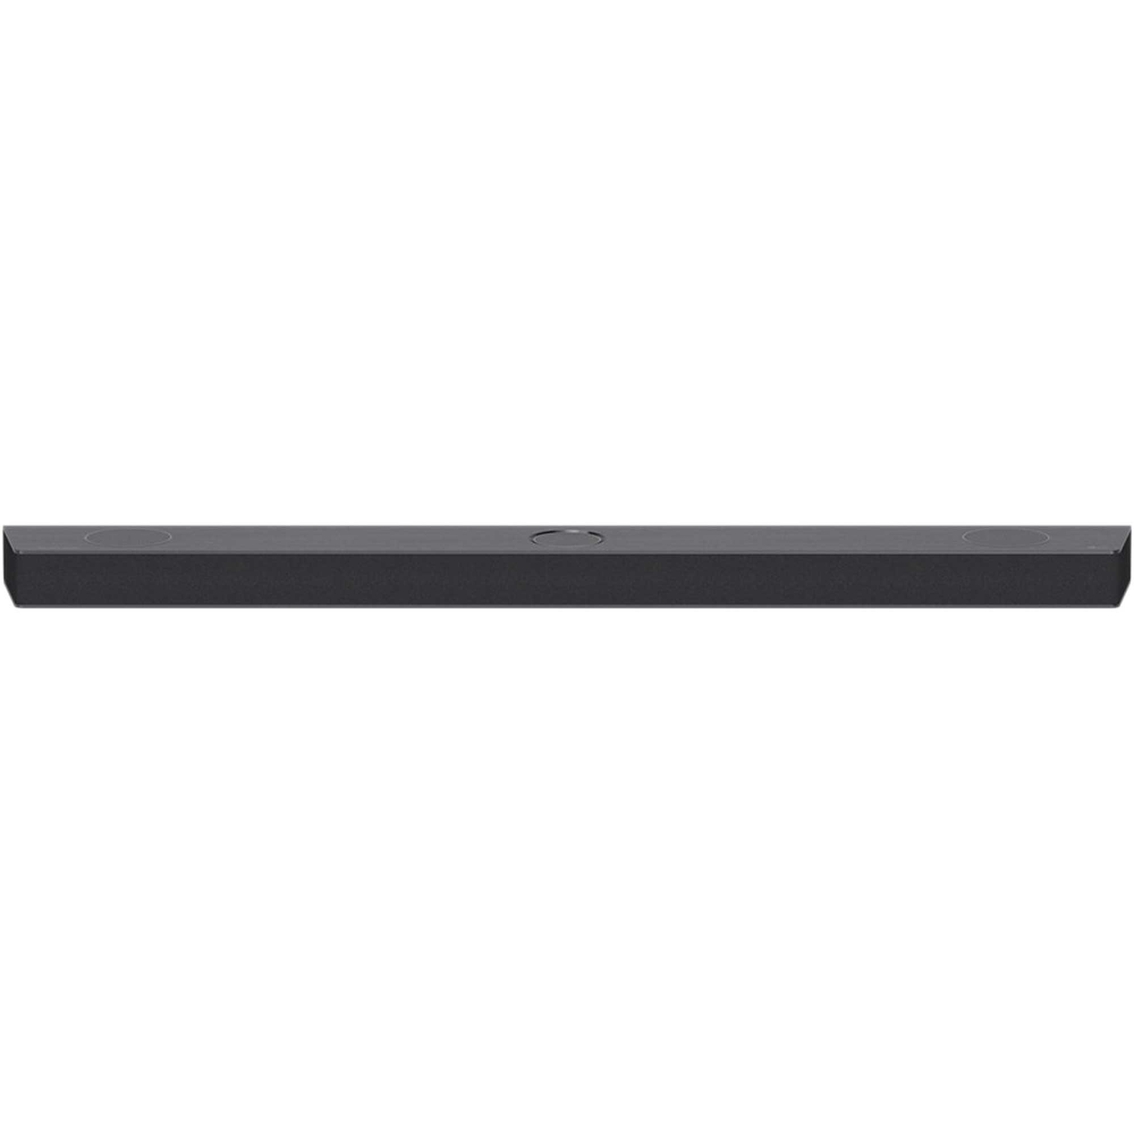 LG S95QR 9.1.5 Ch. 810W High Res Audio Sound Bar and Rear Surround Speakers - Image 3 of 10